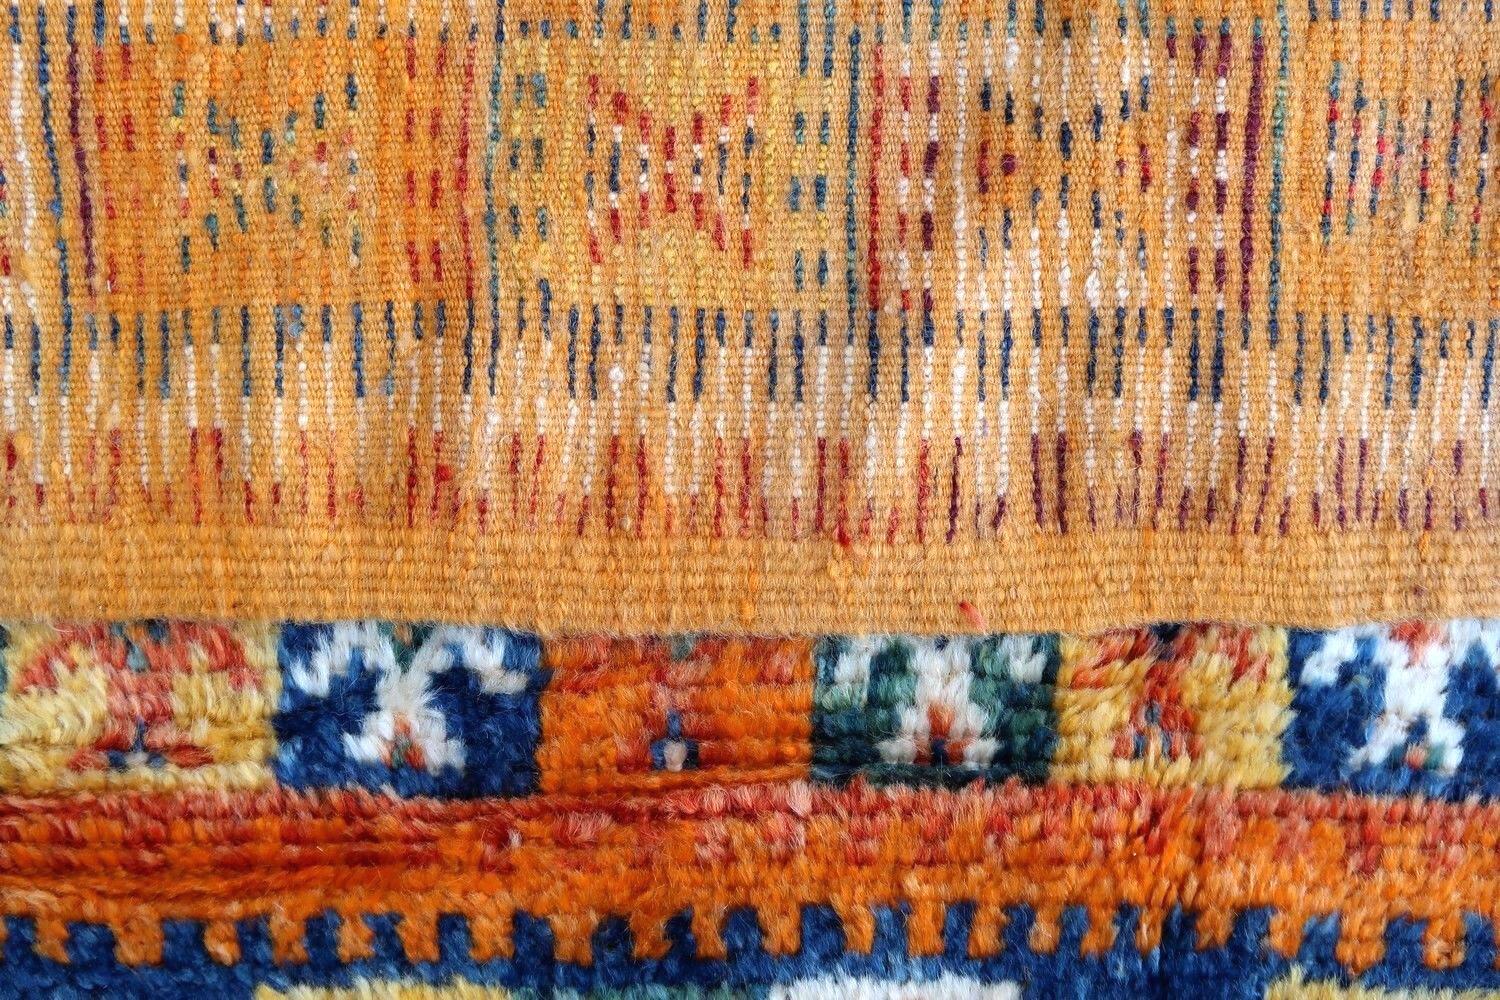 Antique handmade Moroccan rug in original good condition. The rug is from the beginning of 20th century made in wool.

-condition: original good,

-circa: 1900s,

-size: 4.2' x 9.2' (130cm x 280cm),

-material: wool,

-country of origin: